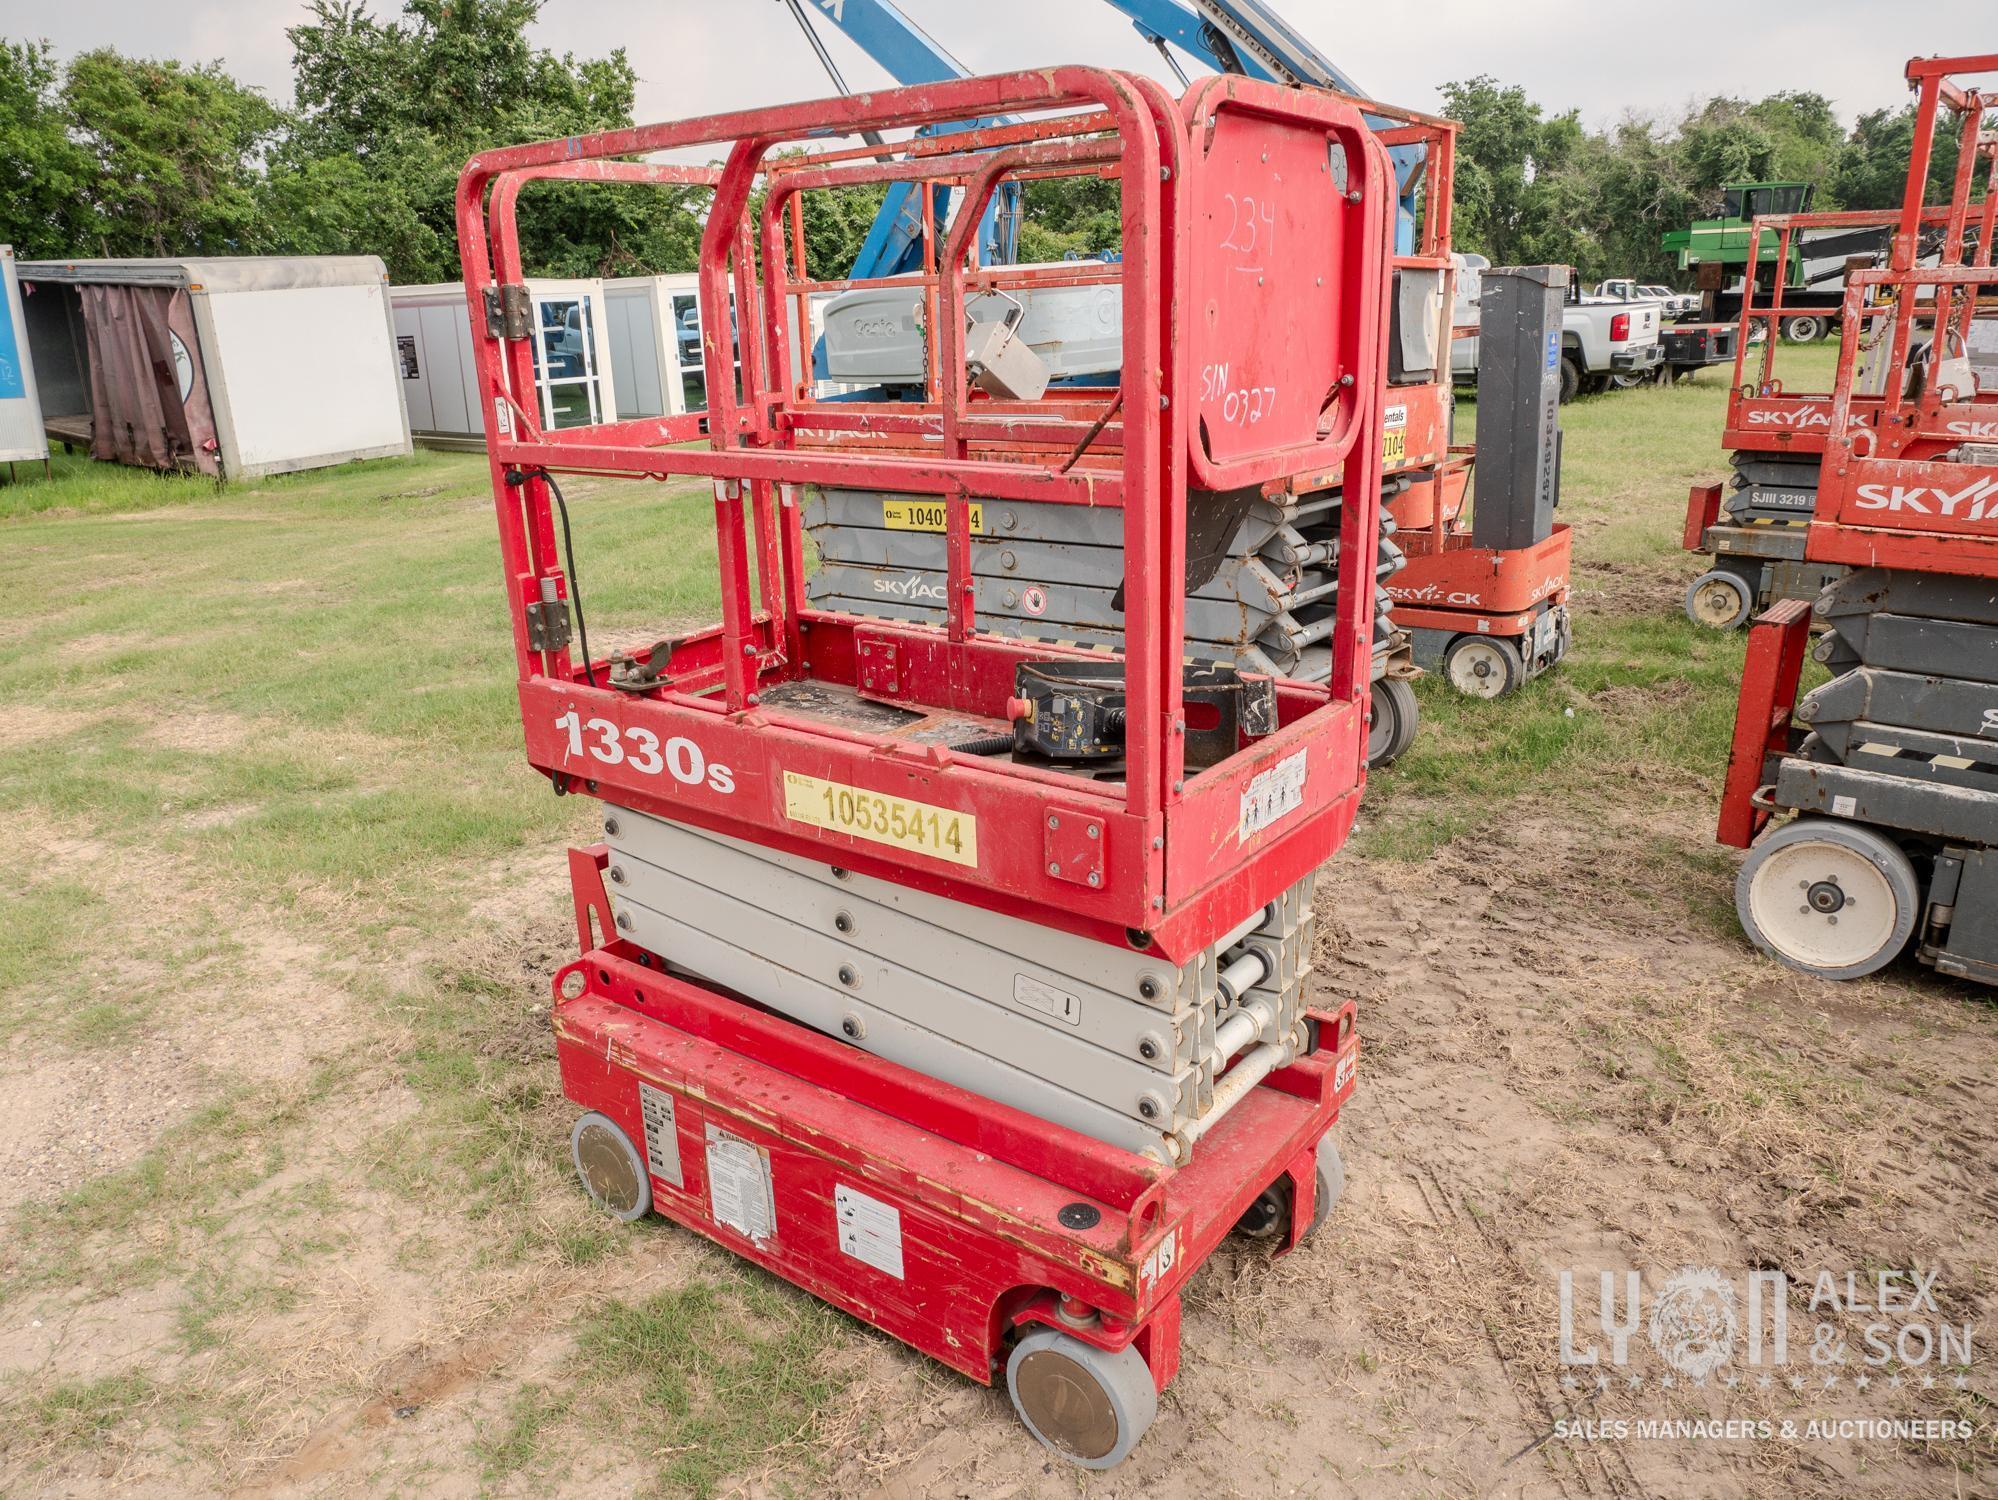 2016 MEC 1330SE SCISSOR LIFT SN:16300327 electric powered, equipped with 13ft. Platform height,